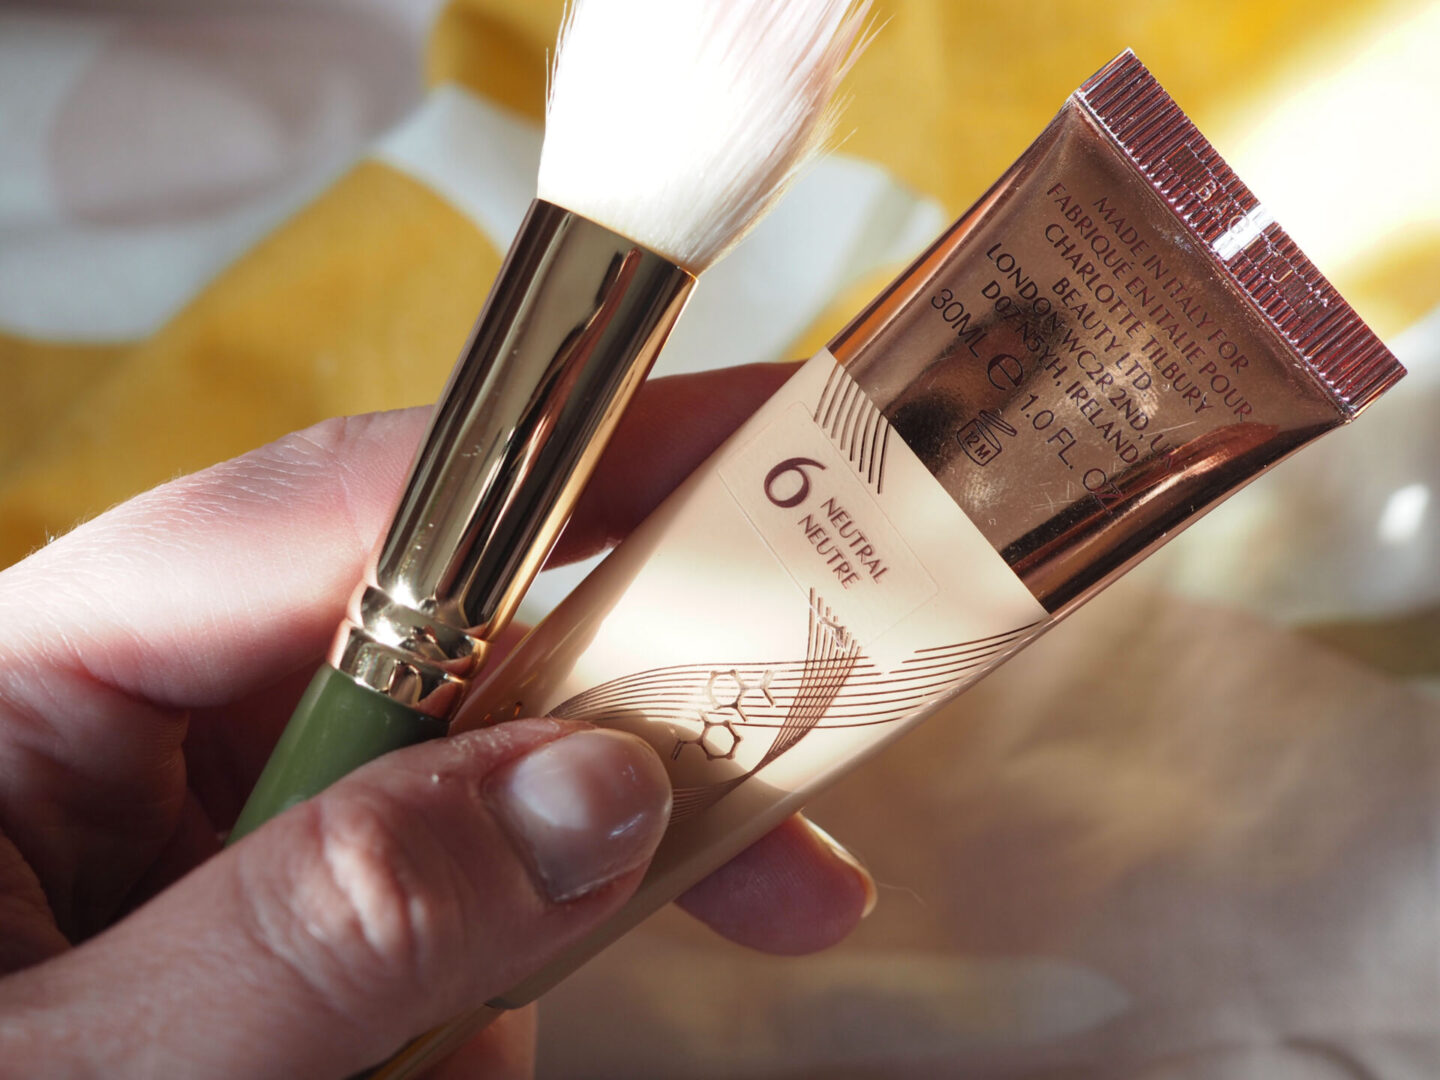 Charlotte Tilbury Beautiful Skin Foundation : Full Review with Before